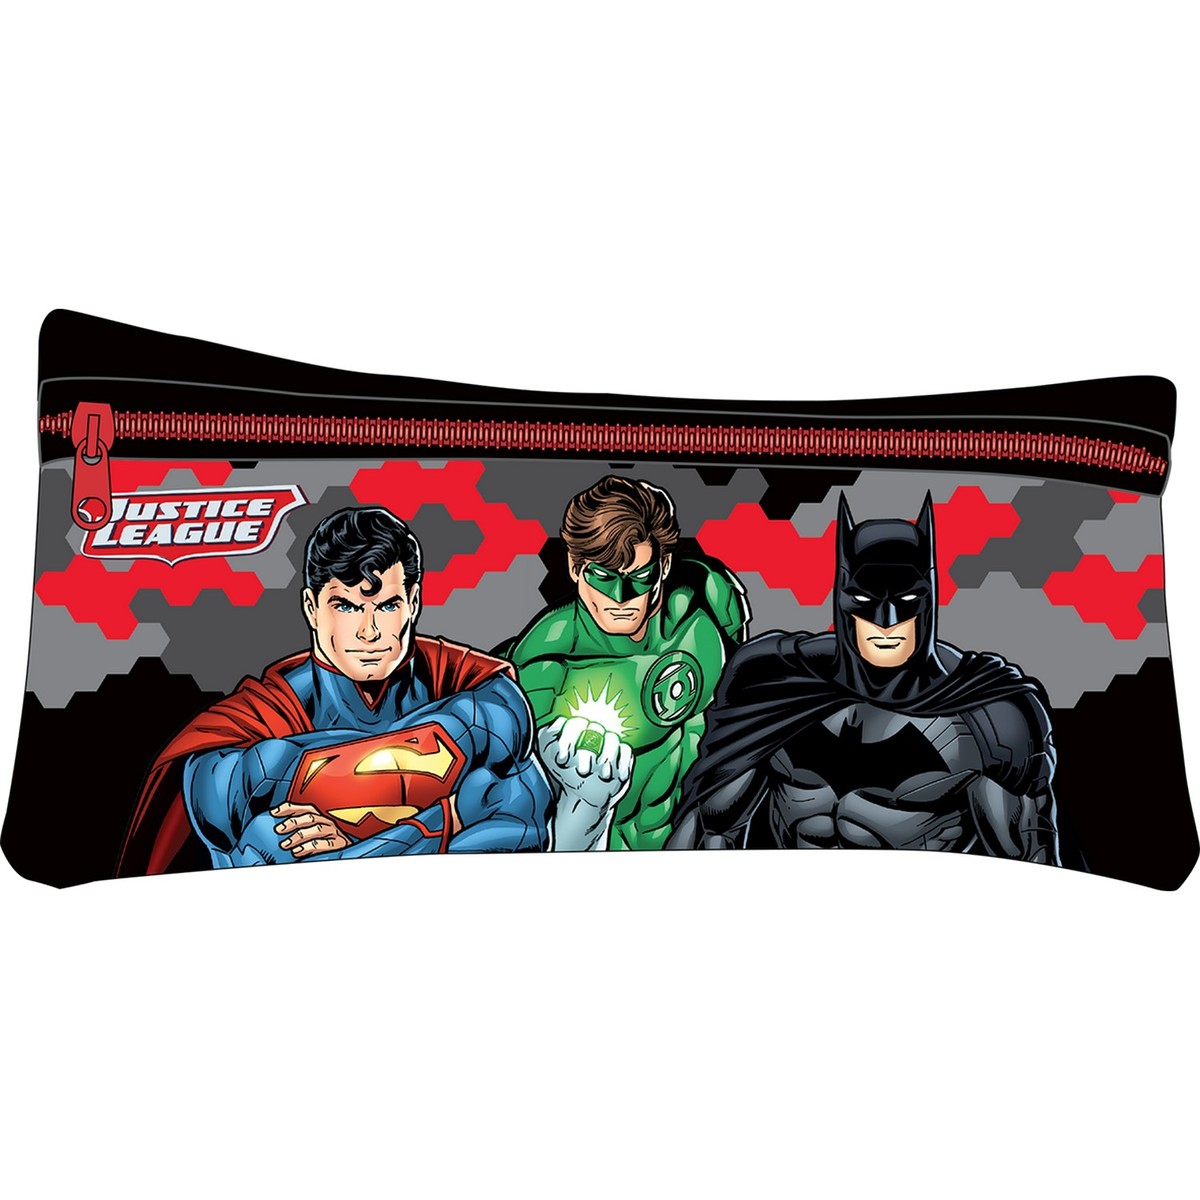 Justice League School Trolley Value Pack Set of 5Pcs FK160532 18inch